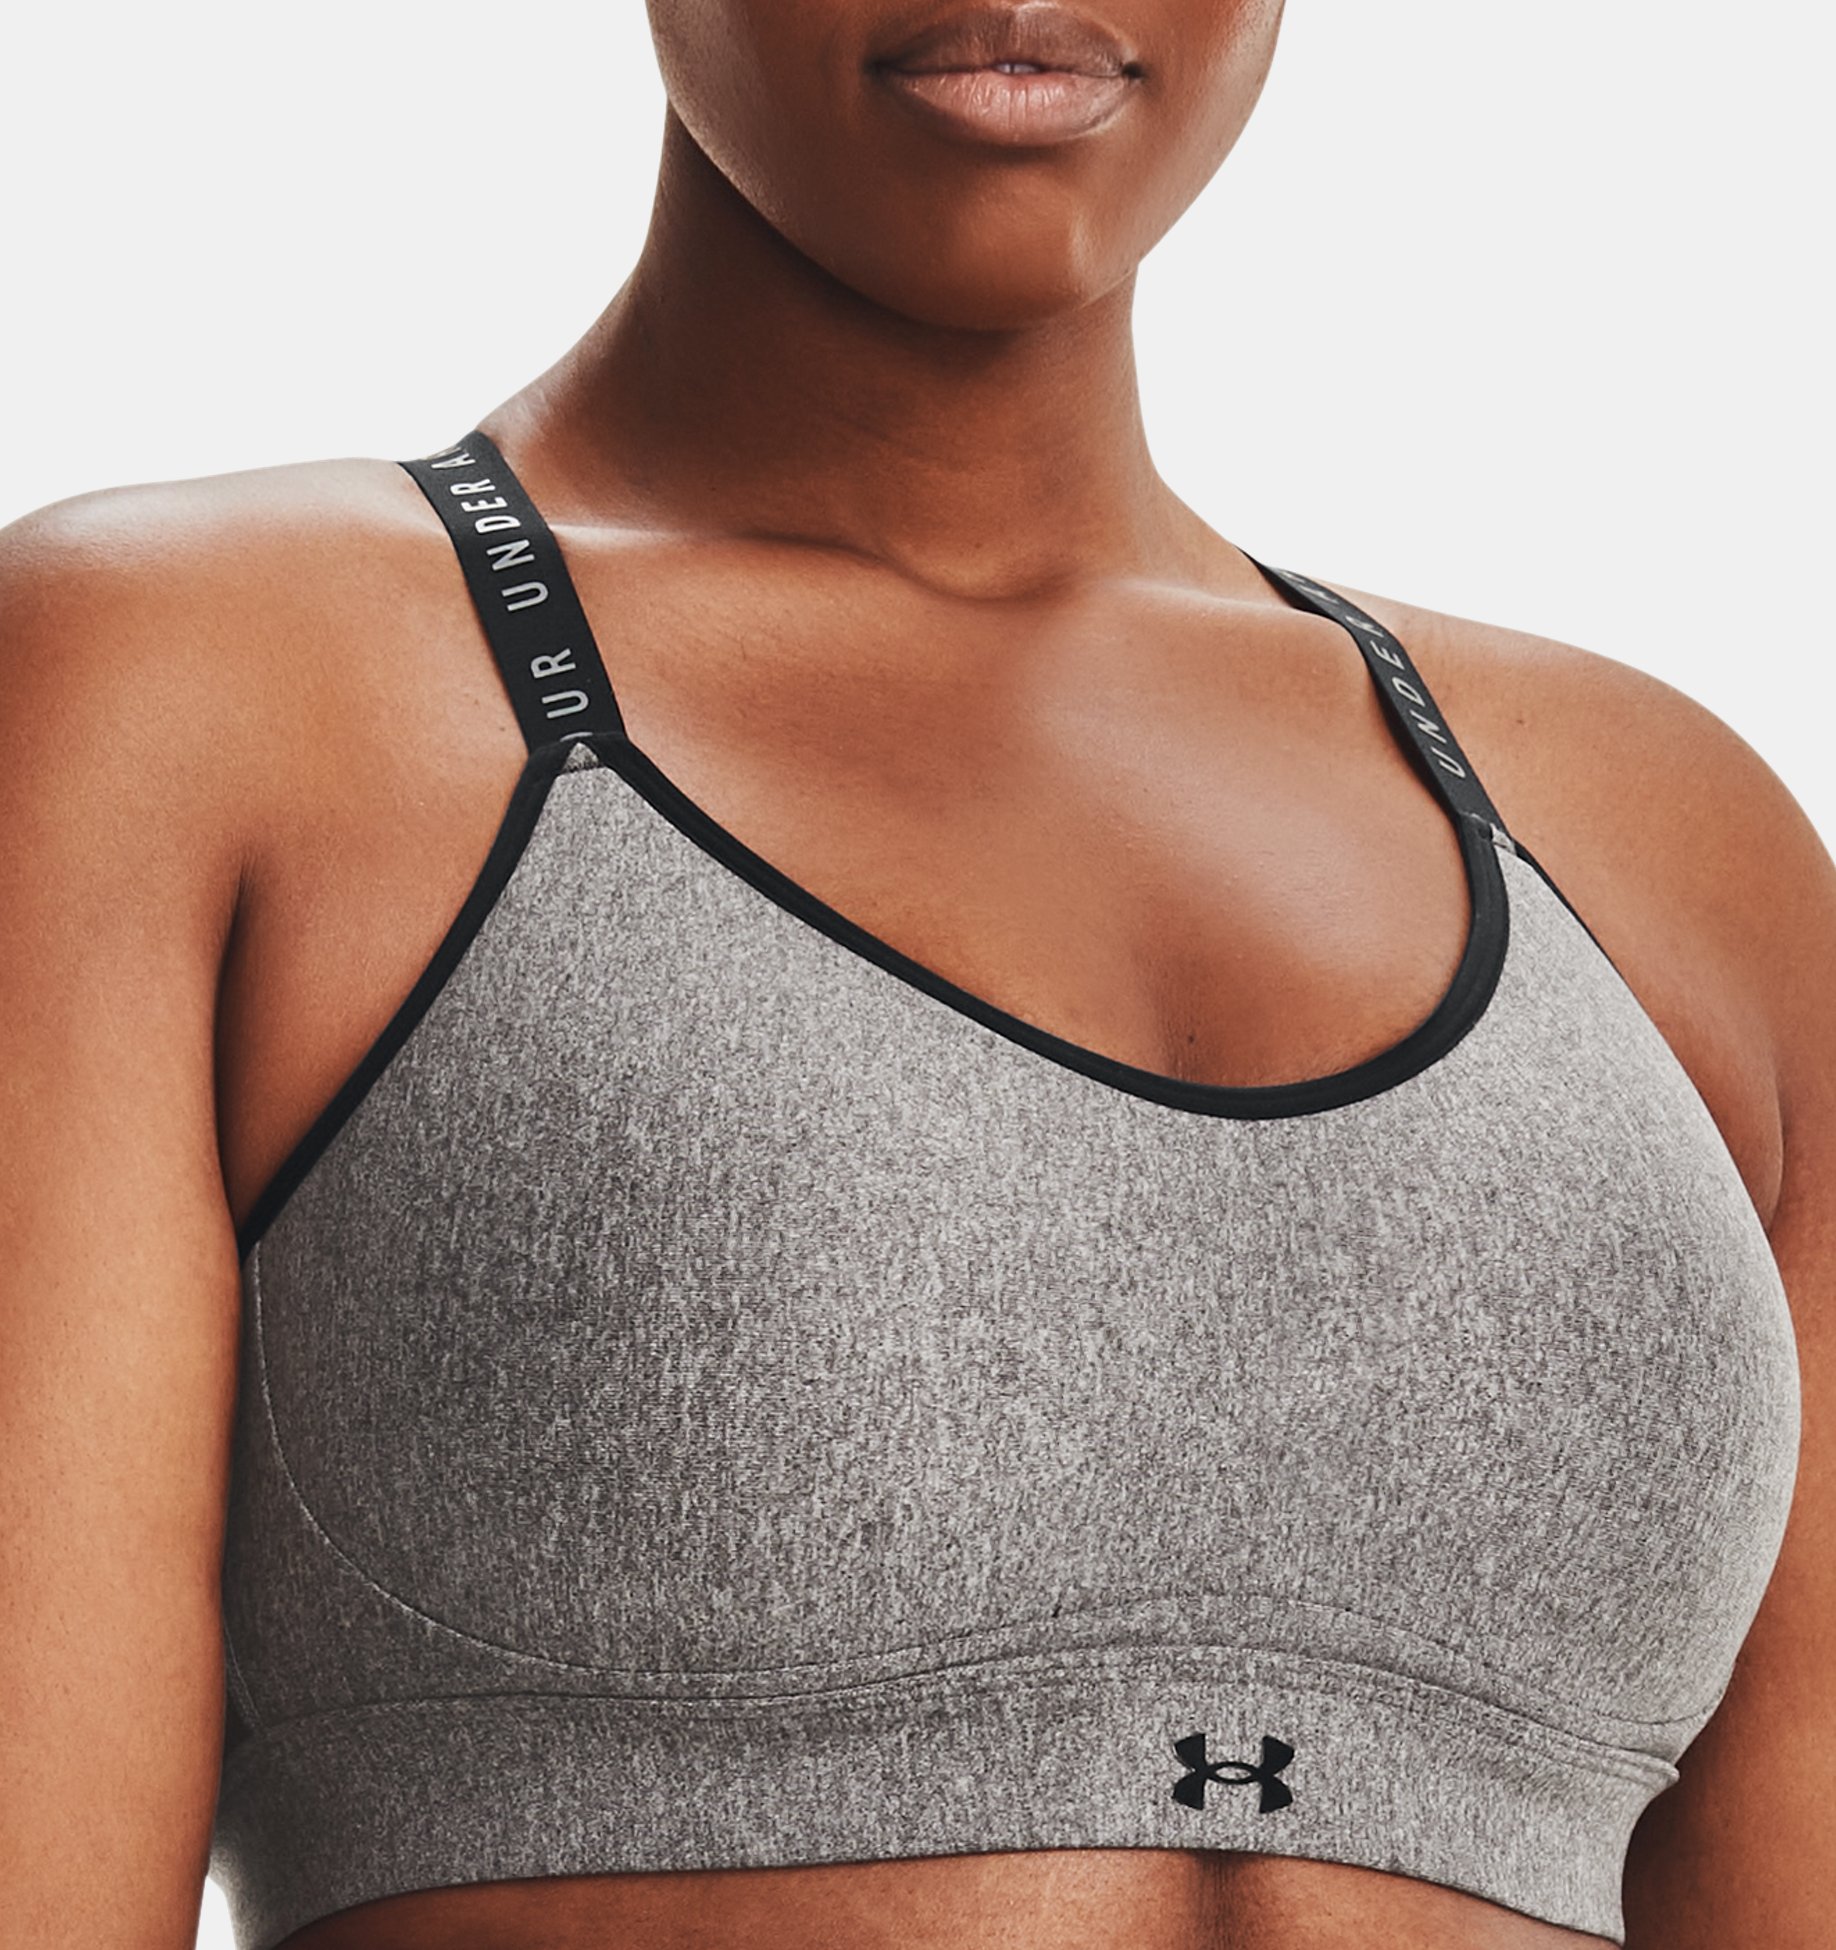 https://underarmour.scene7.com/is/image/Underarmour/V5-1362949-019_FC_LG?rp=standard-0pad|pdpZoomDesktop&scl=0.72&fmt=jpg&qlt=85&resMode=sharp2&cache=on,on&bgc=f0f0f0&wid=1836&hei=1950&size=1500,1500